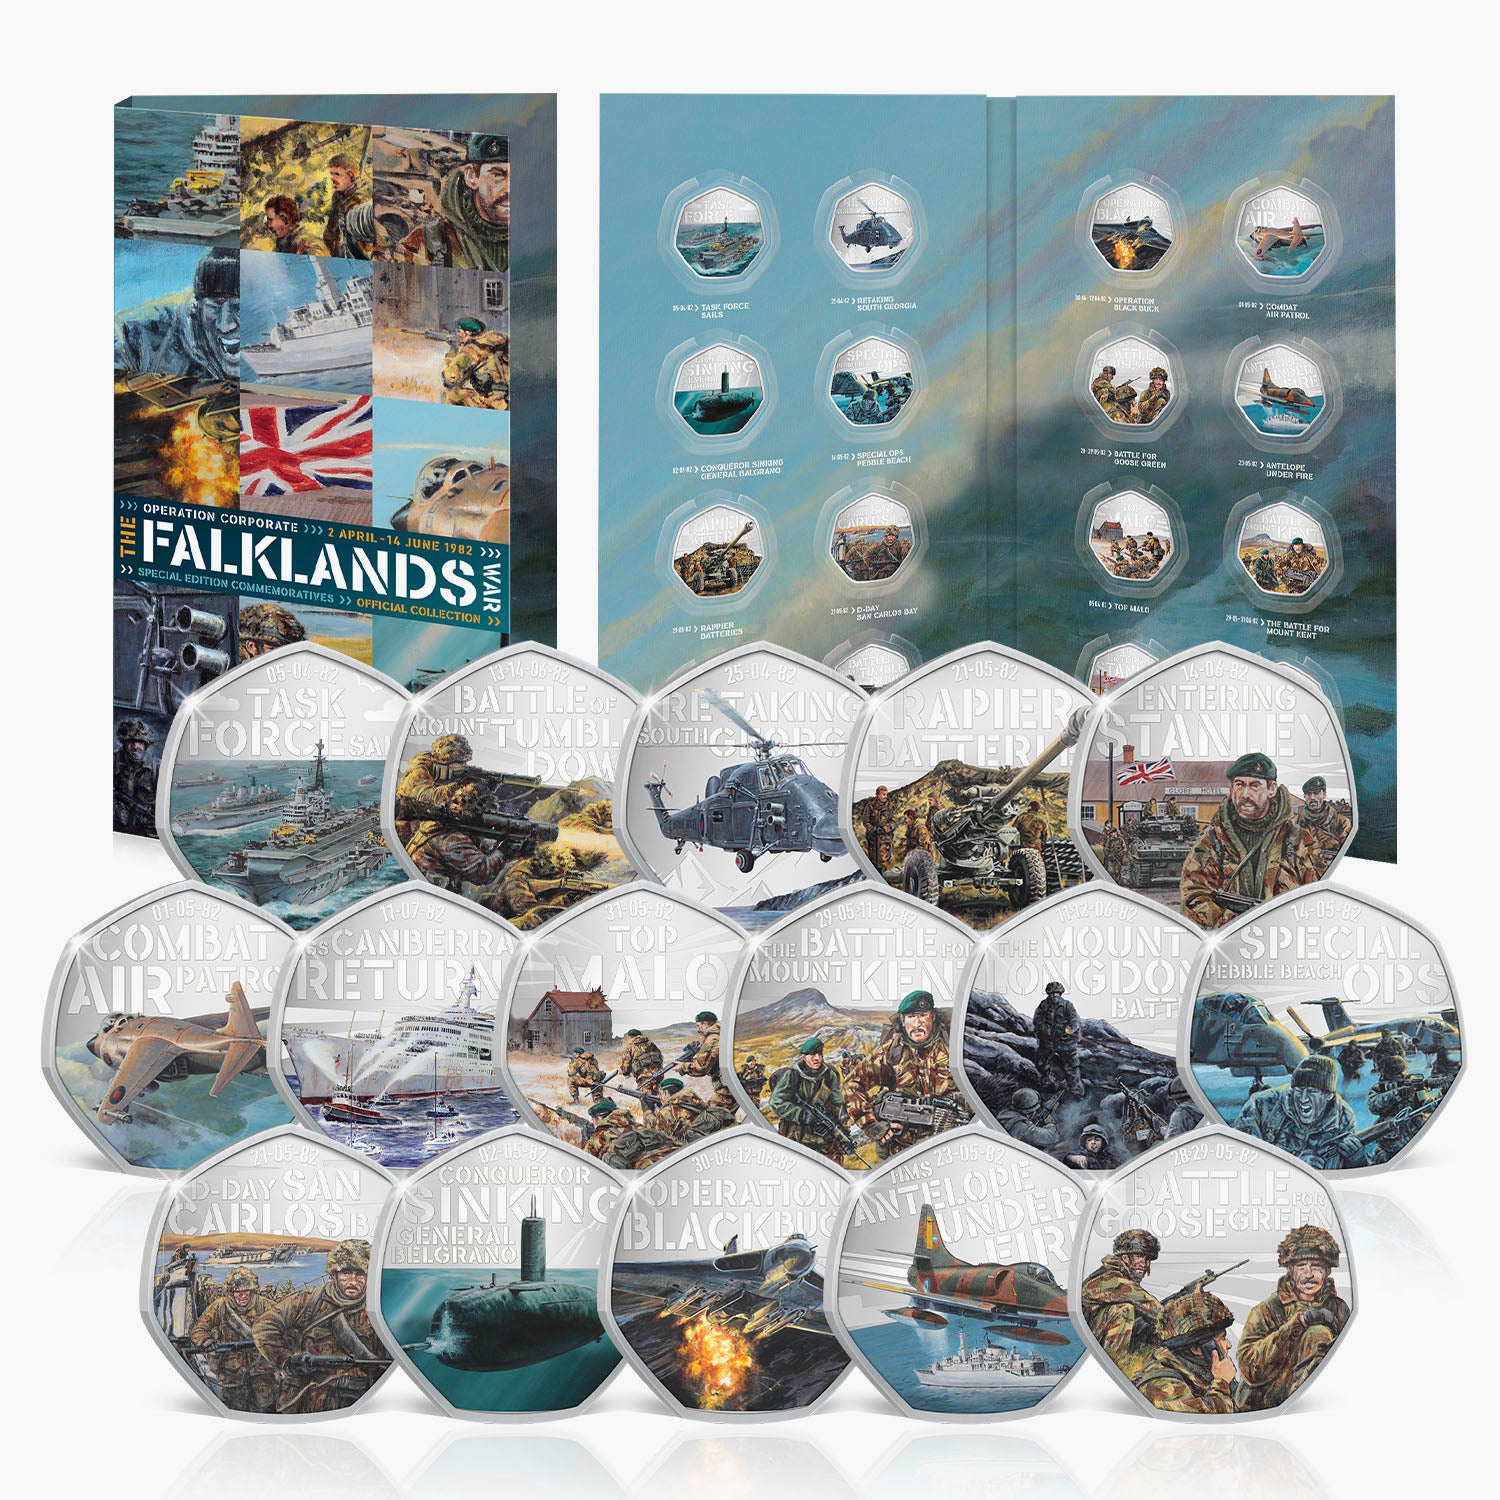 The Official 40th Anniversary of The Falklands War Complete Collection